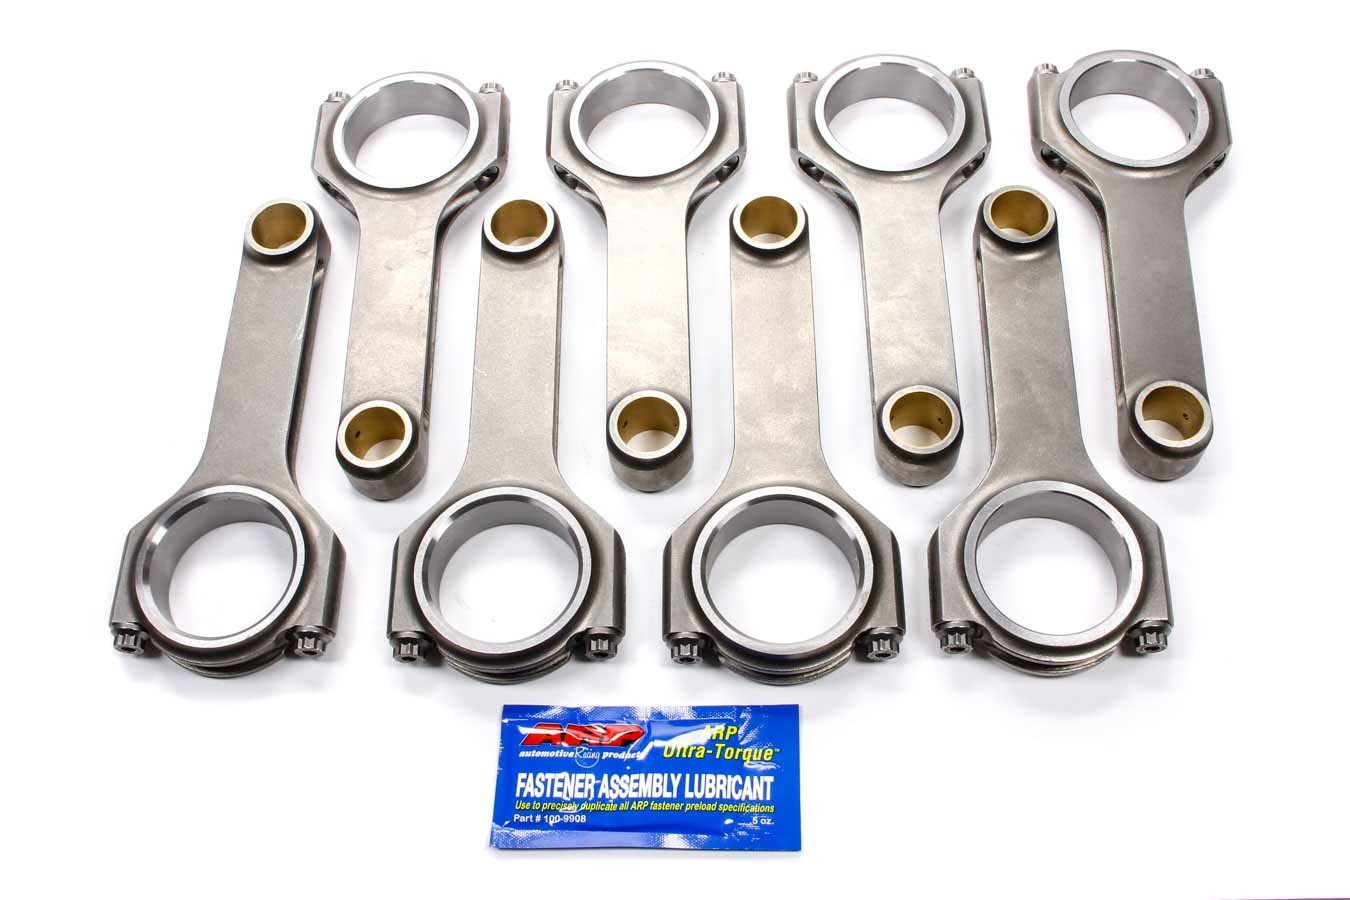 Scat 2-454-6385-2200 - Connecting Rod, Pro Sport, H Beam, 6.385 in Long, Bushed, 7/16 in Cap Screws, ARP8740, Forged Steel, Big Block Chevy, Set of 8